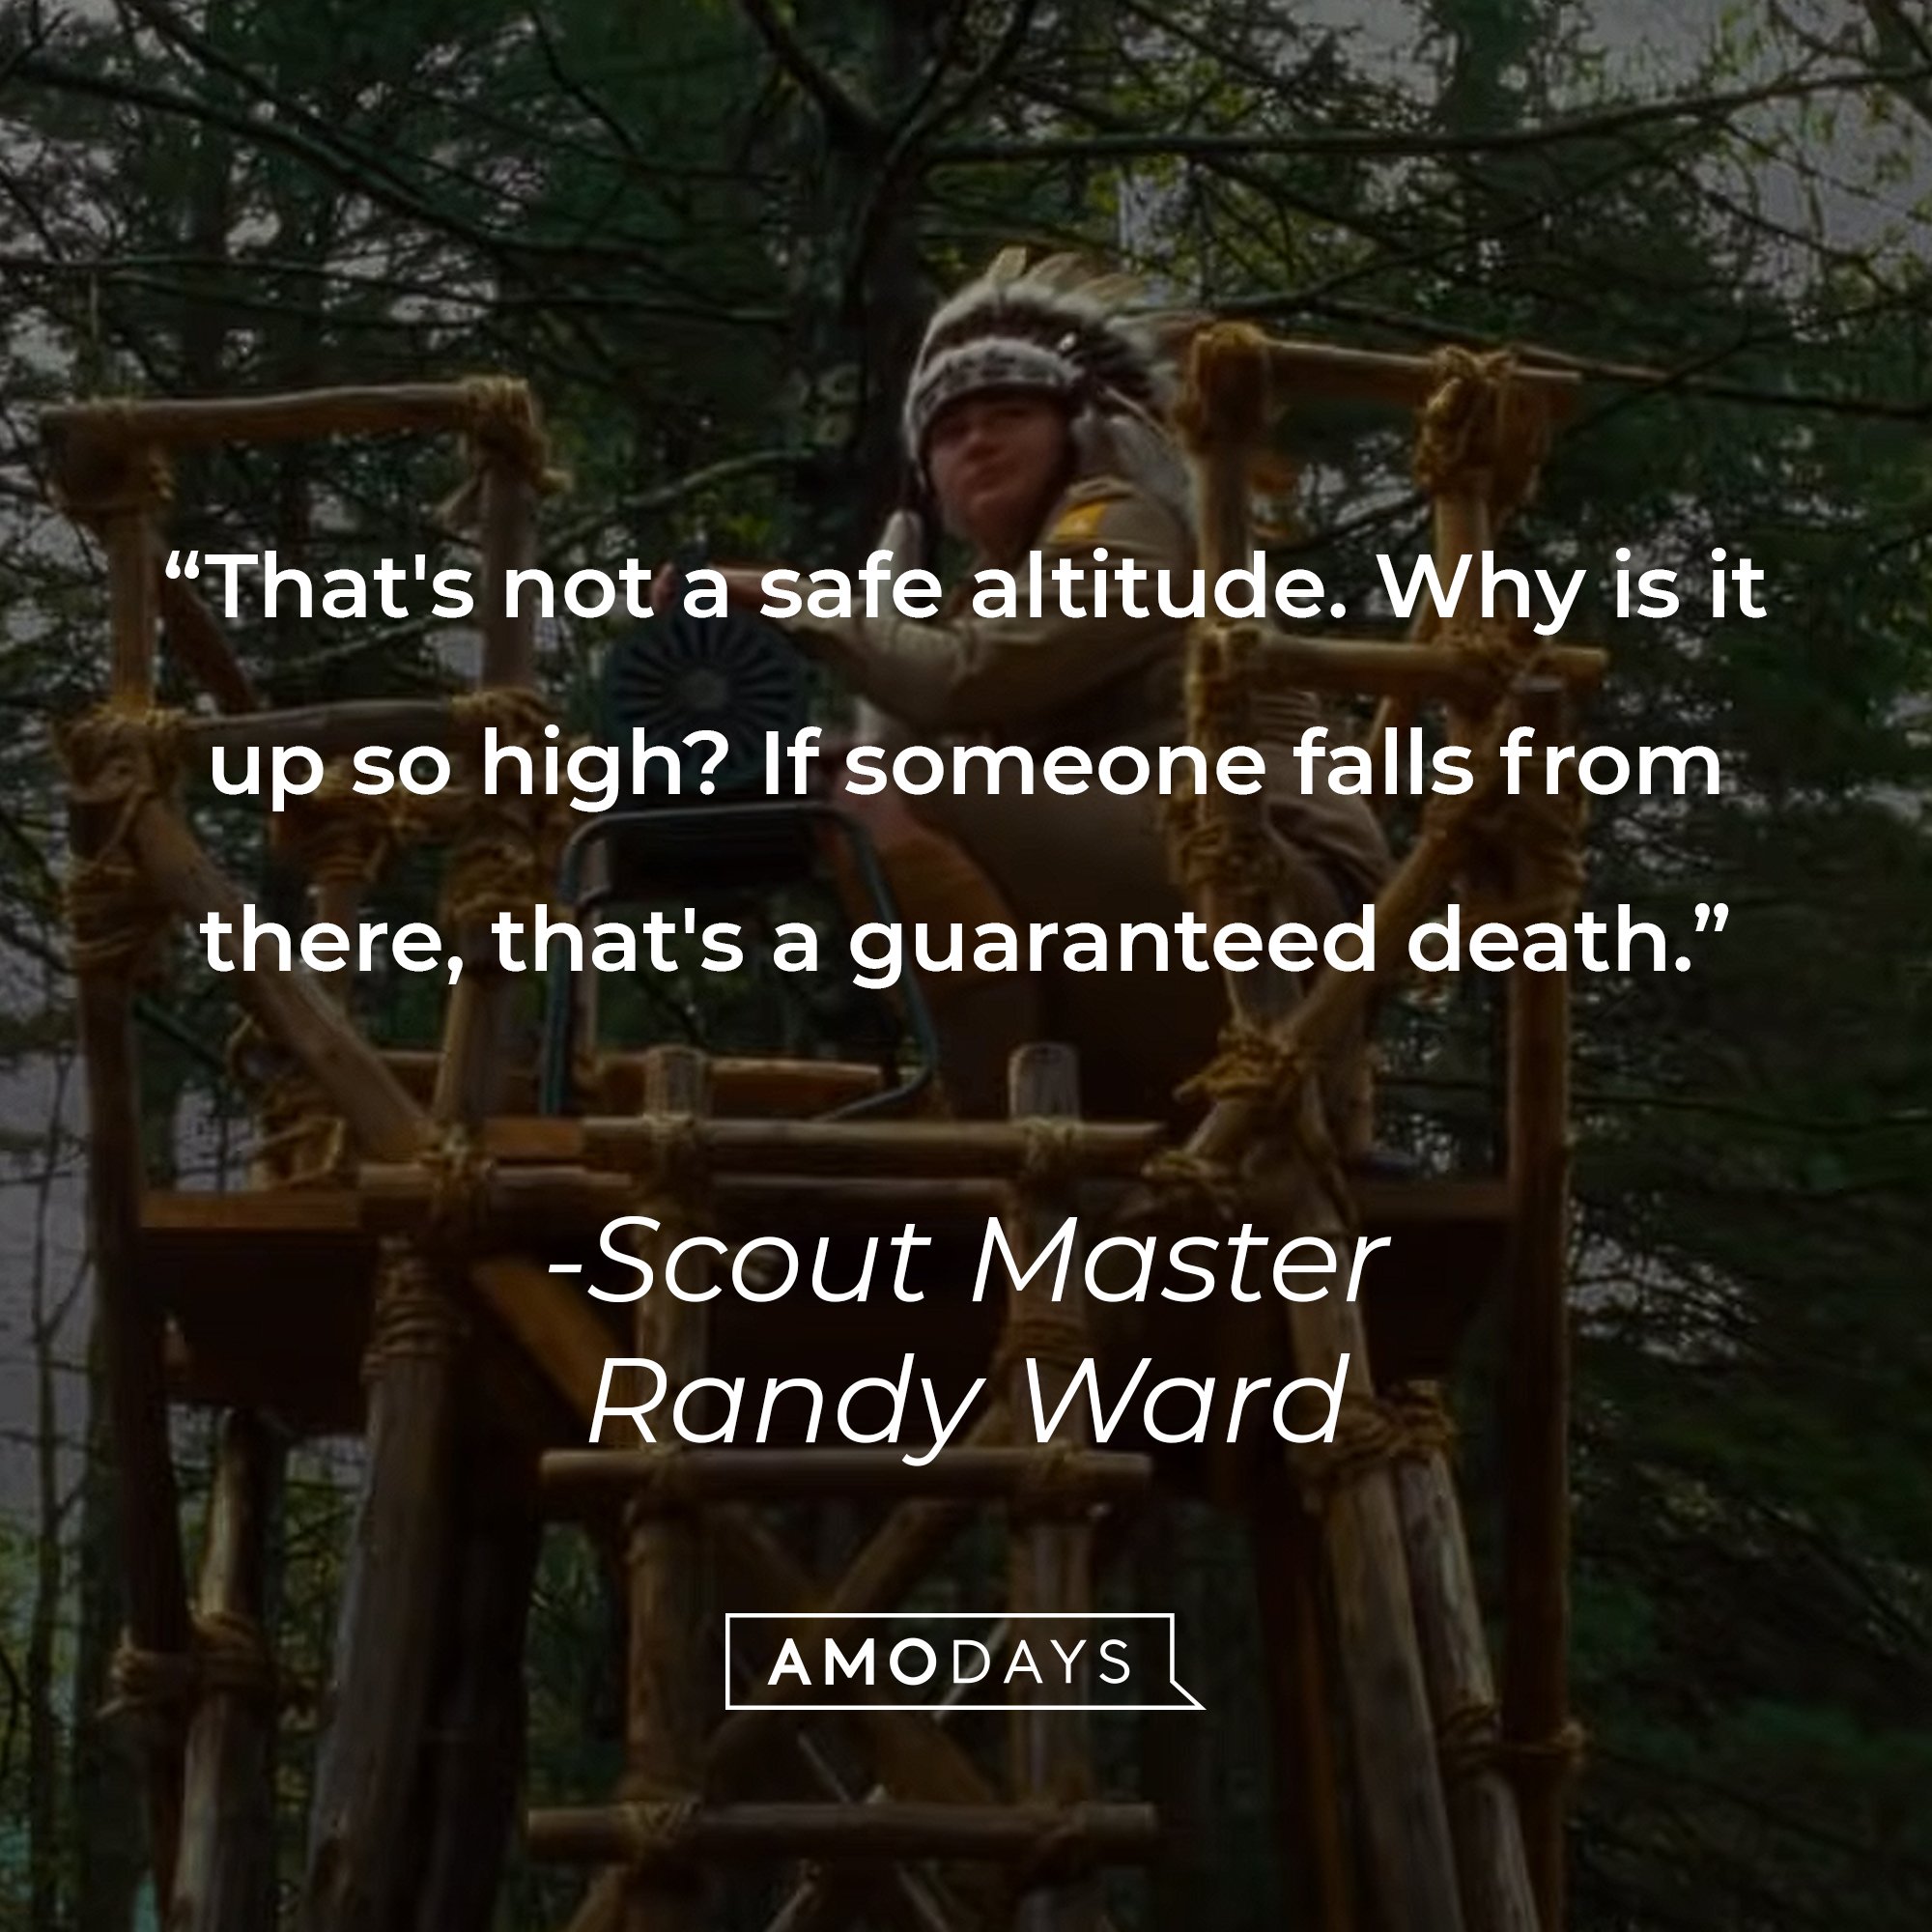 Scout Master Randy Ward's quote: "That's not a safe altitude. Why is it up so high? If someone falls from there, that's a guaranteed death." | Image: AmoDays